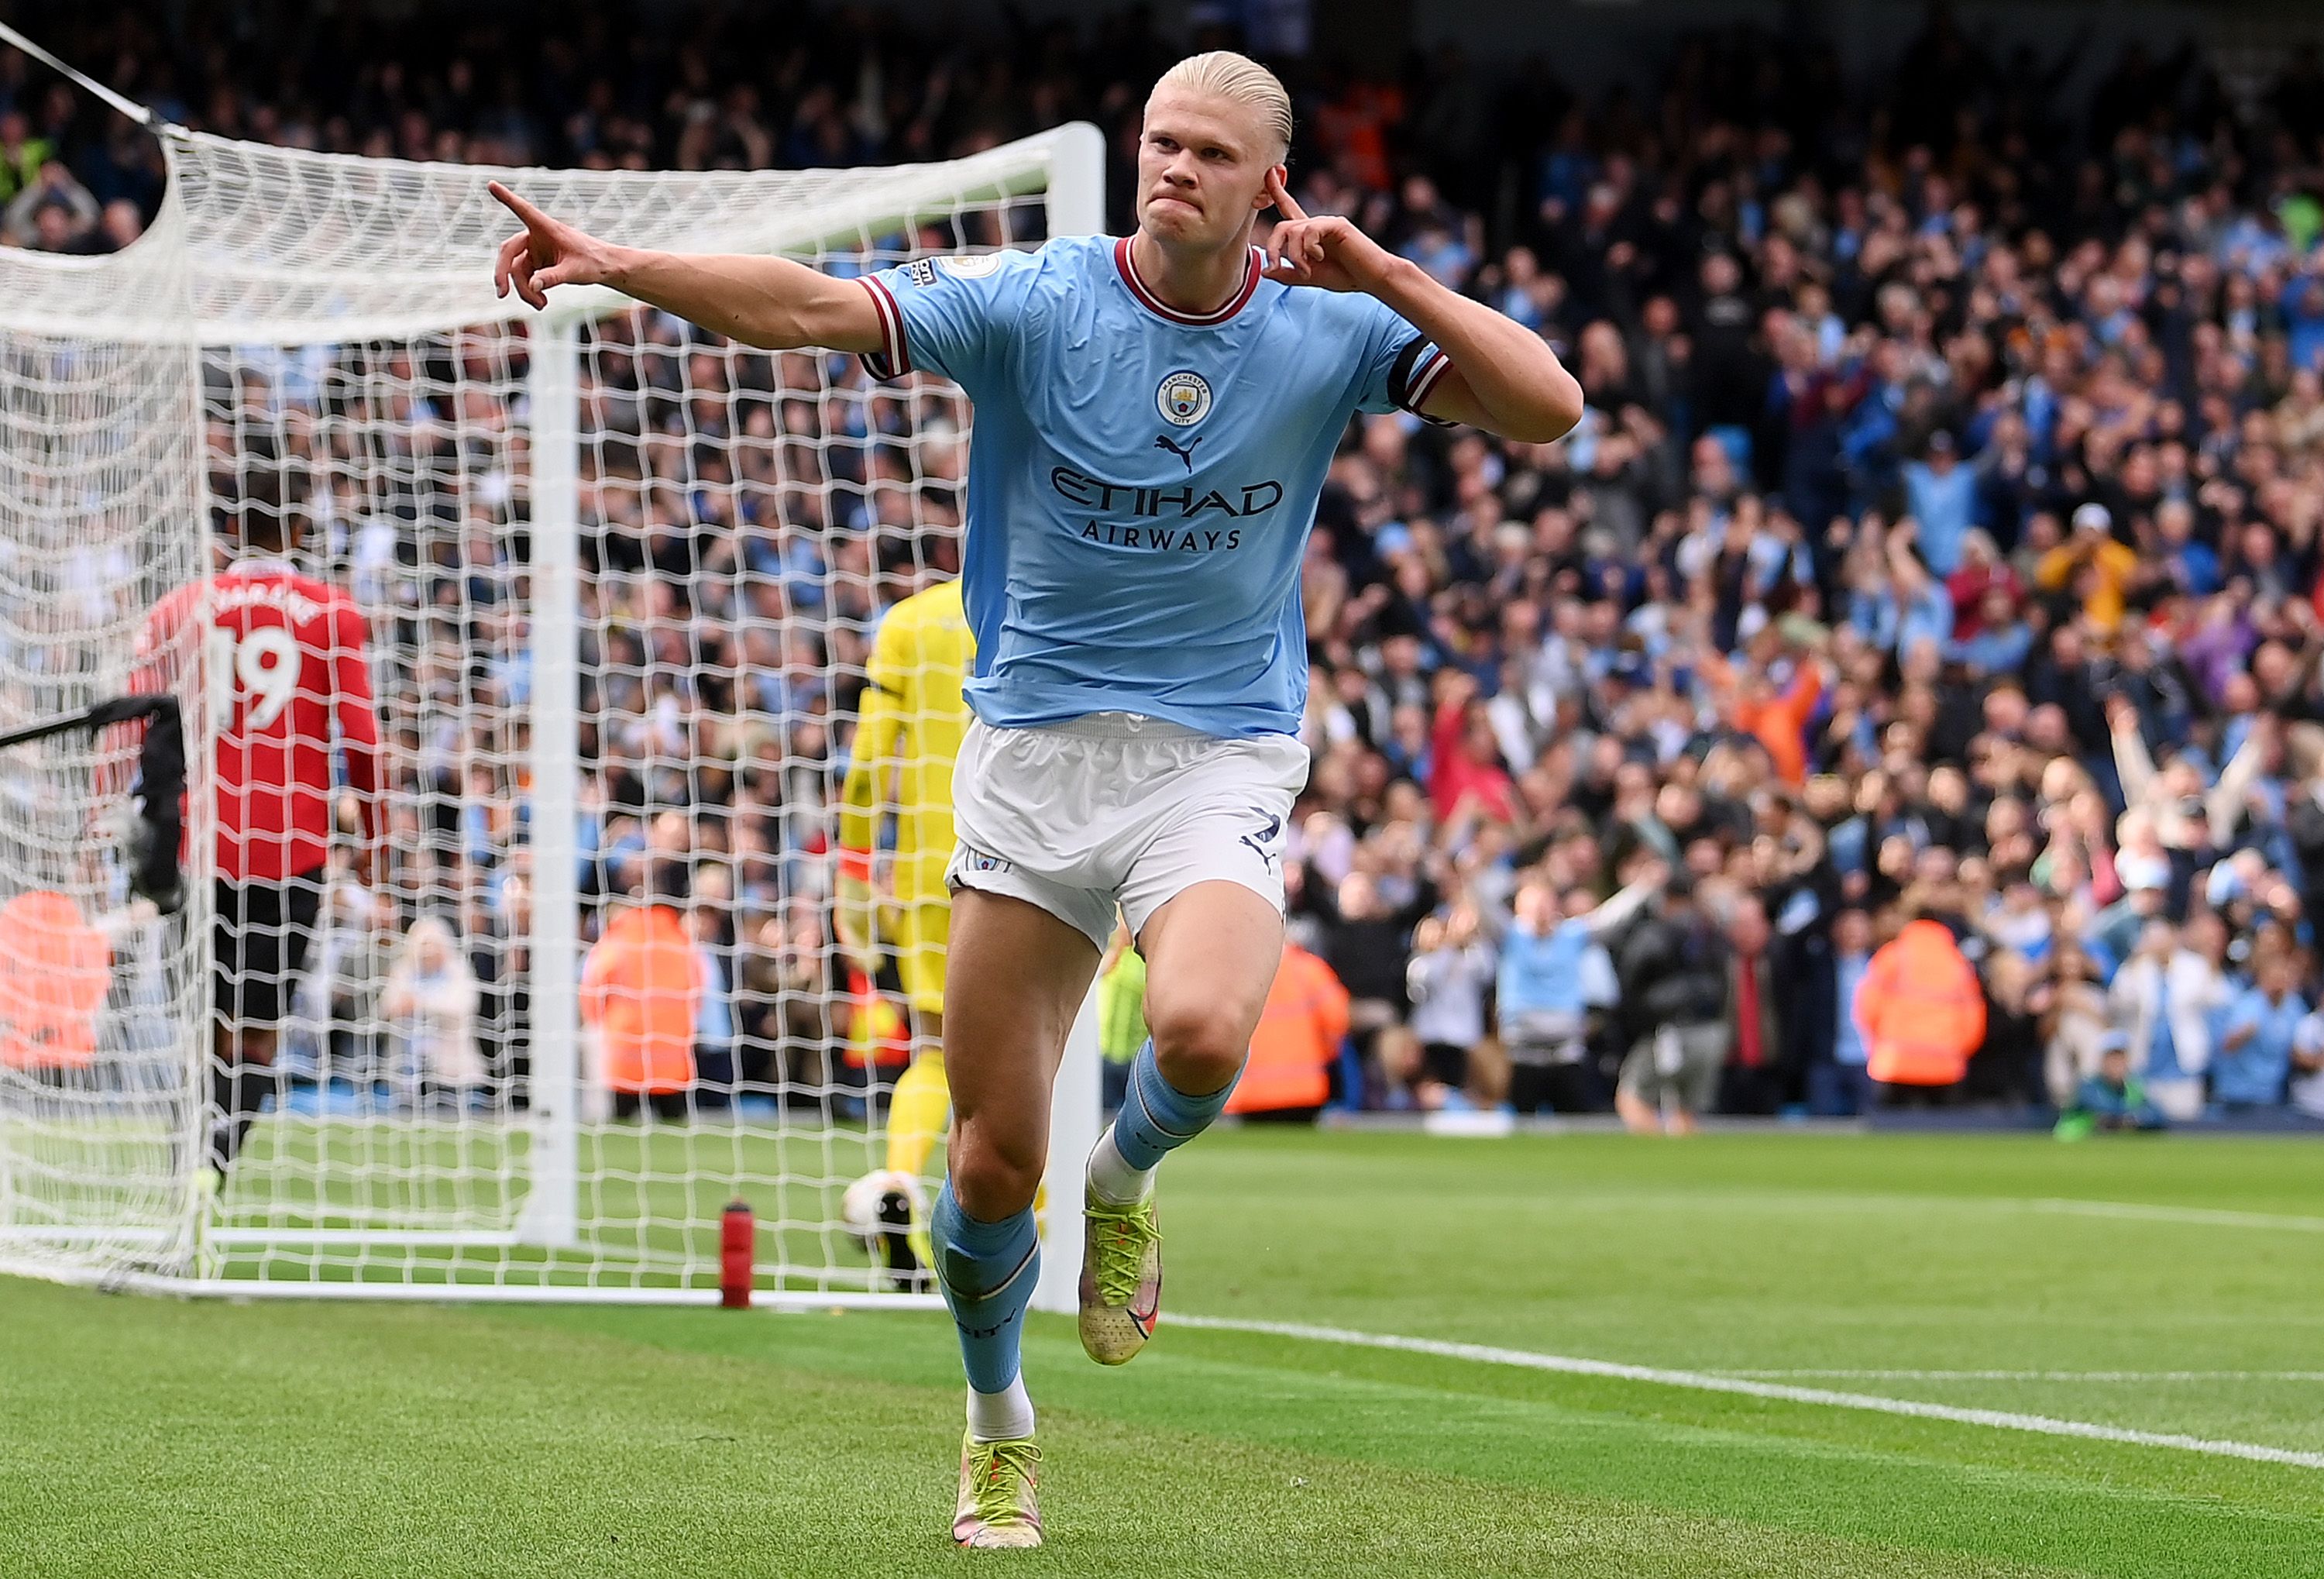 Erling Haaland celebrates scoring in the Manchester derby